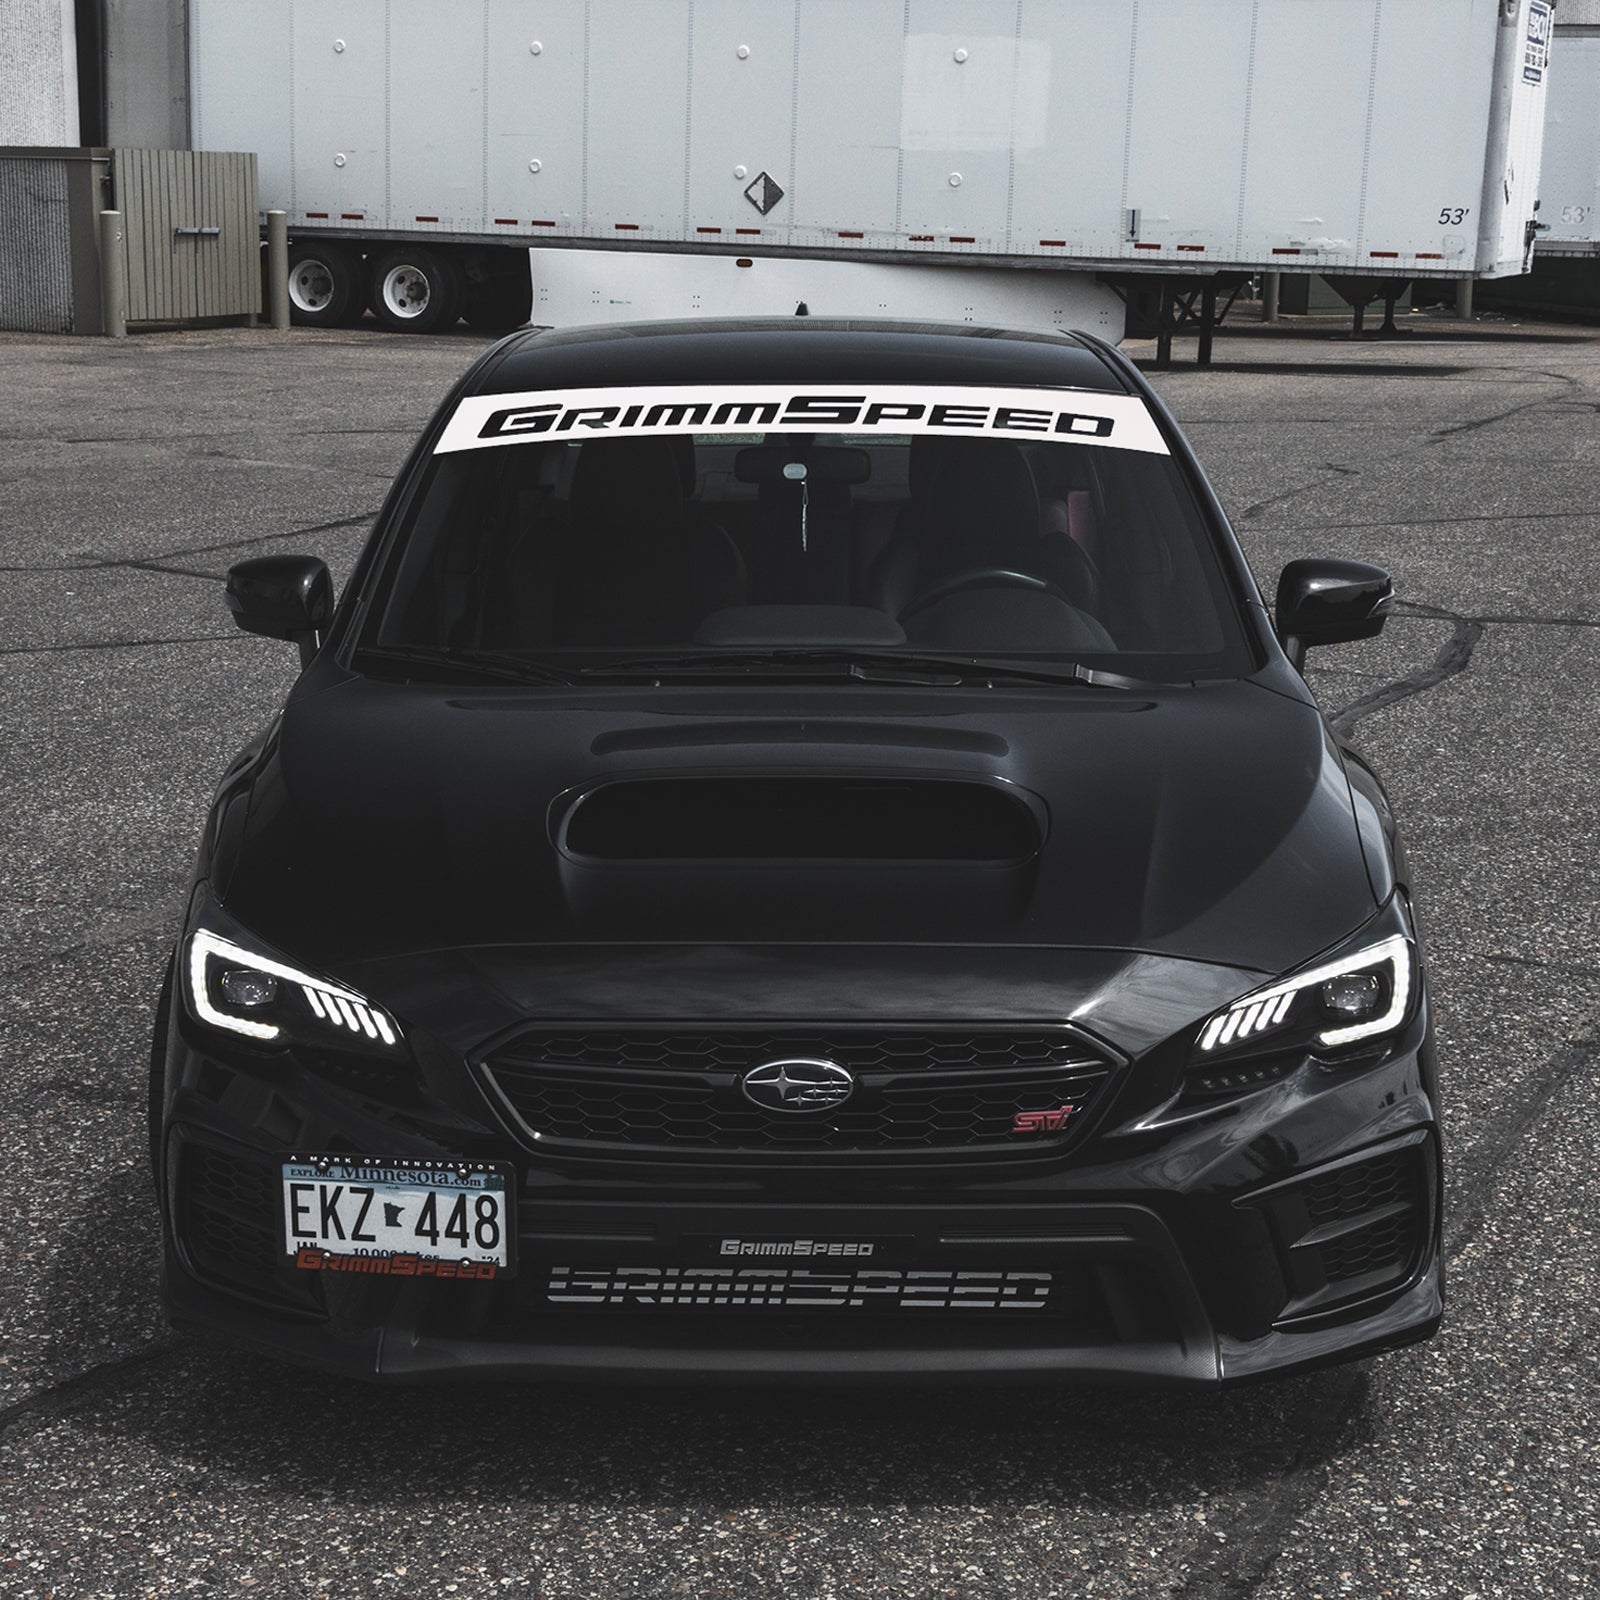 Buy white GrimmSpeed Windshield Banners - FREE U.S. SHIPPING!